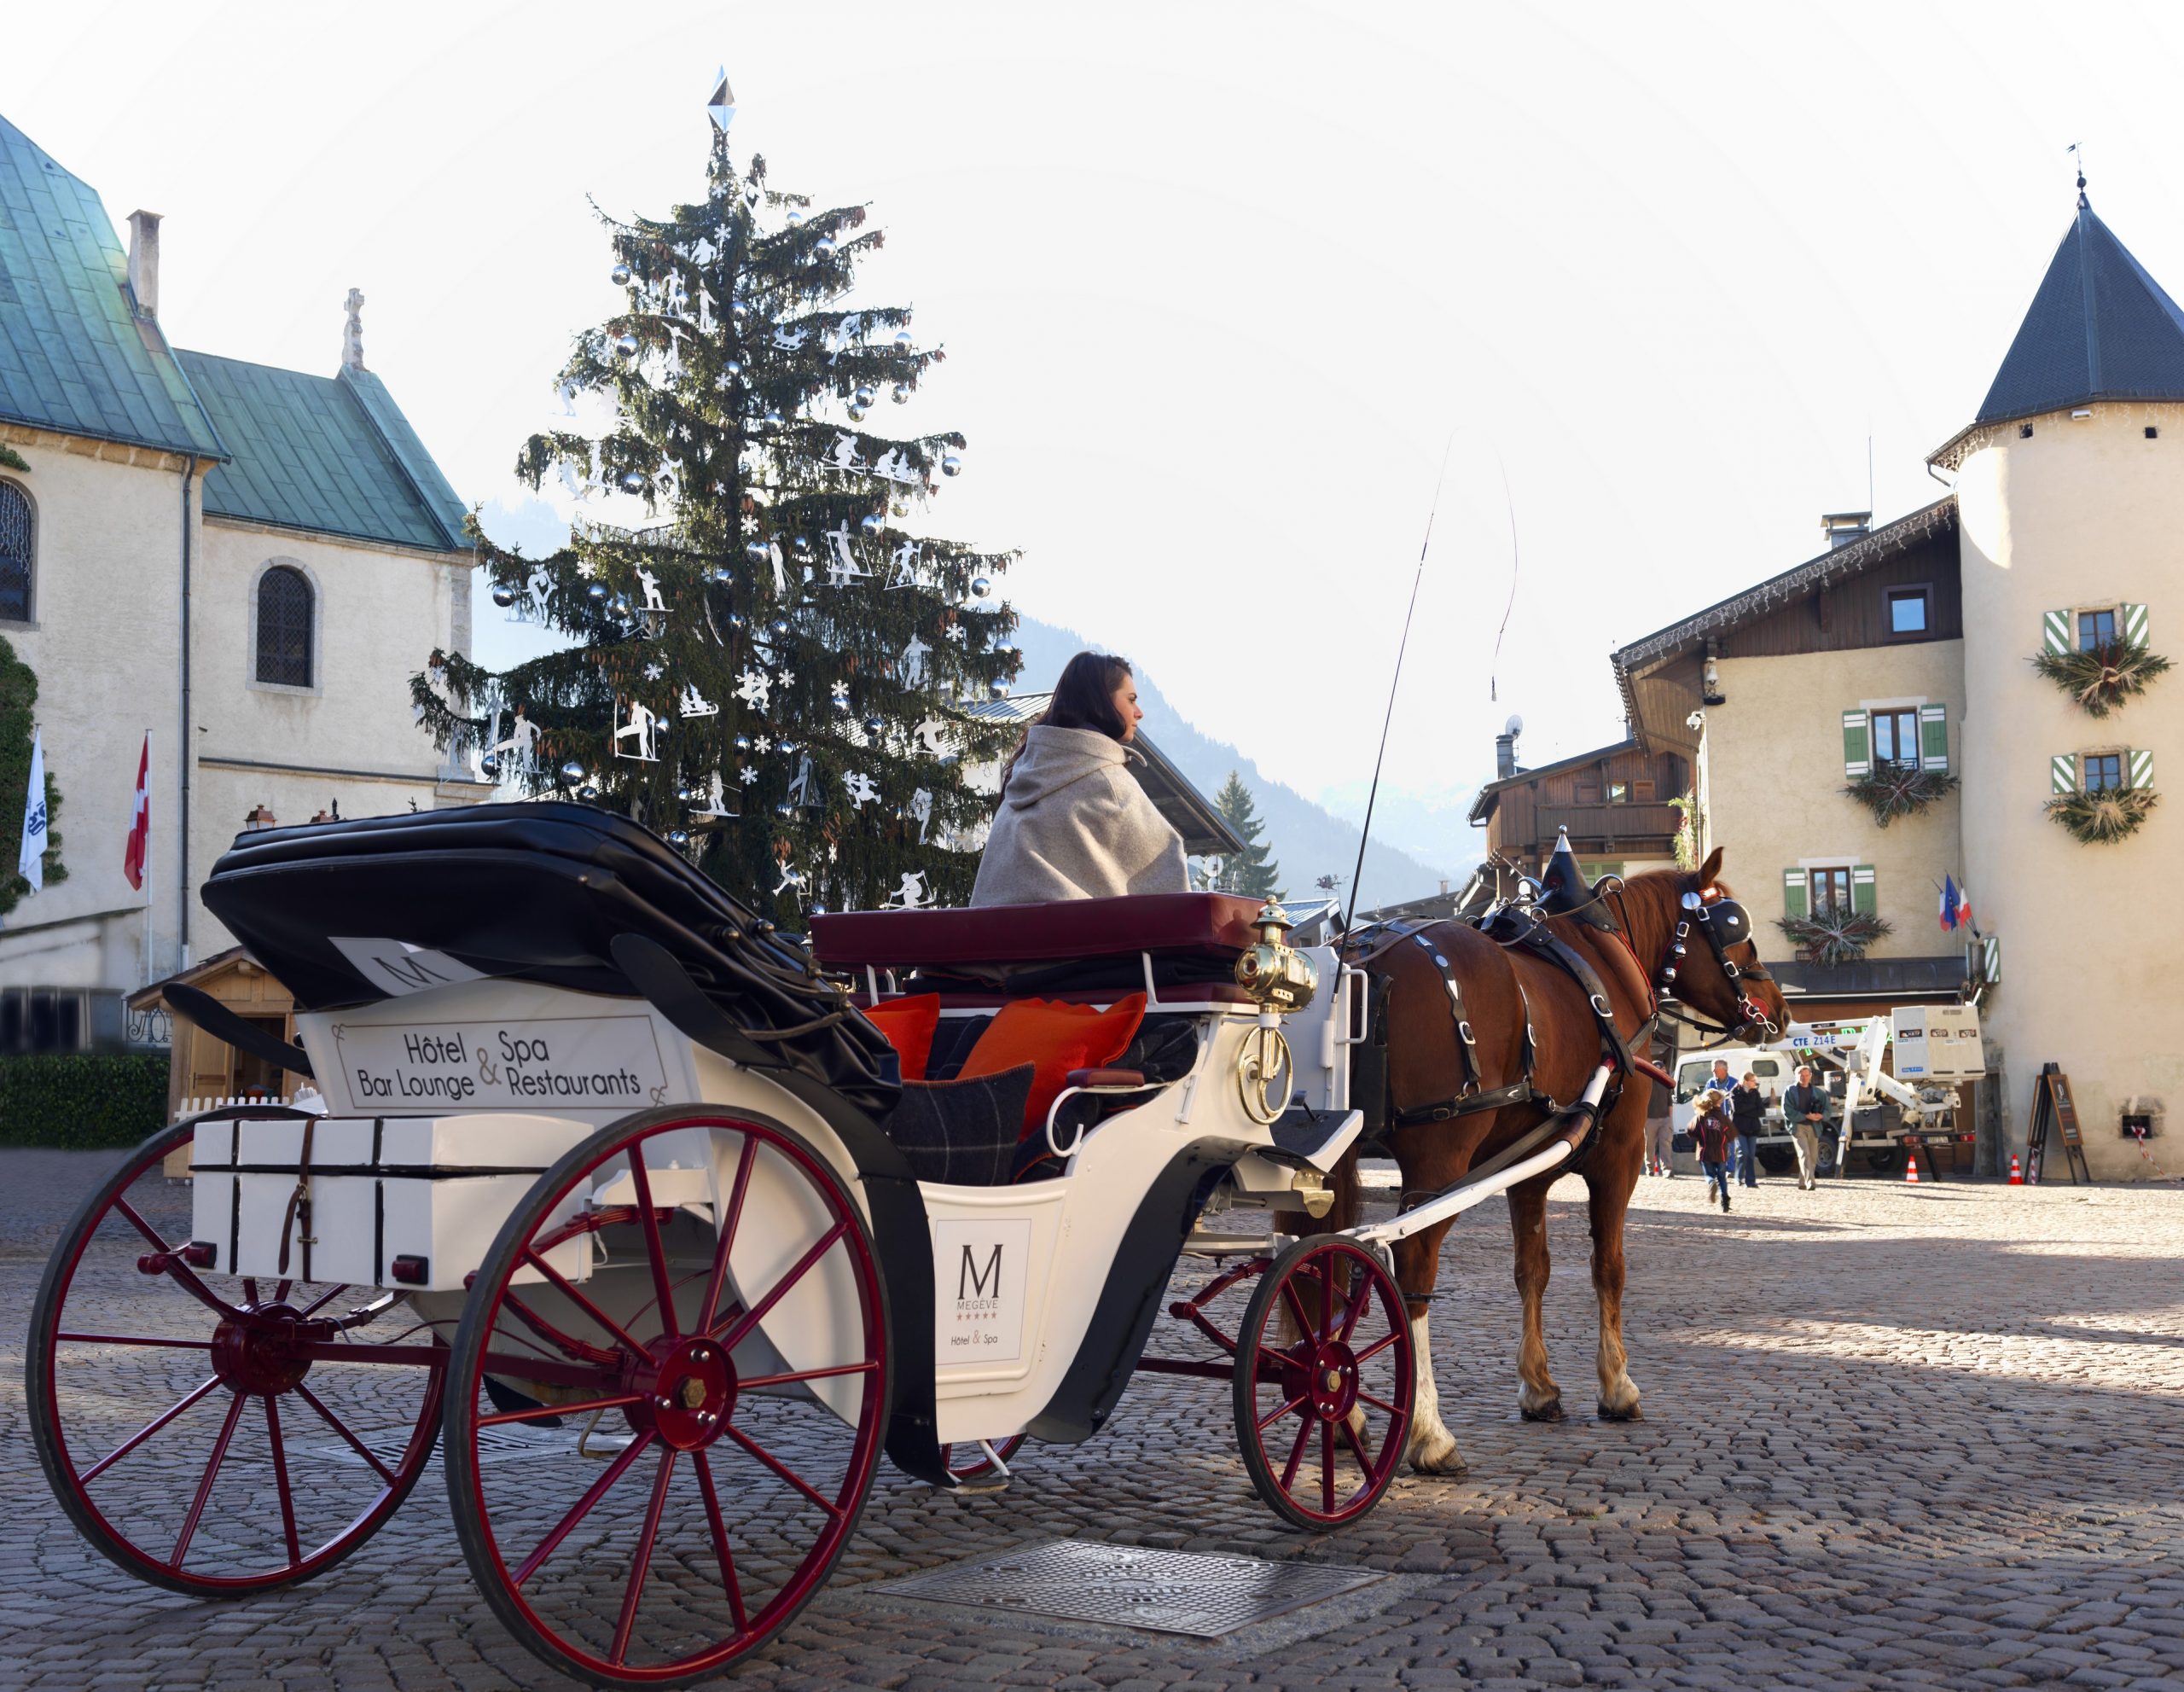 Girl sitting in horse carriage in the French town, Megeve.